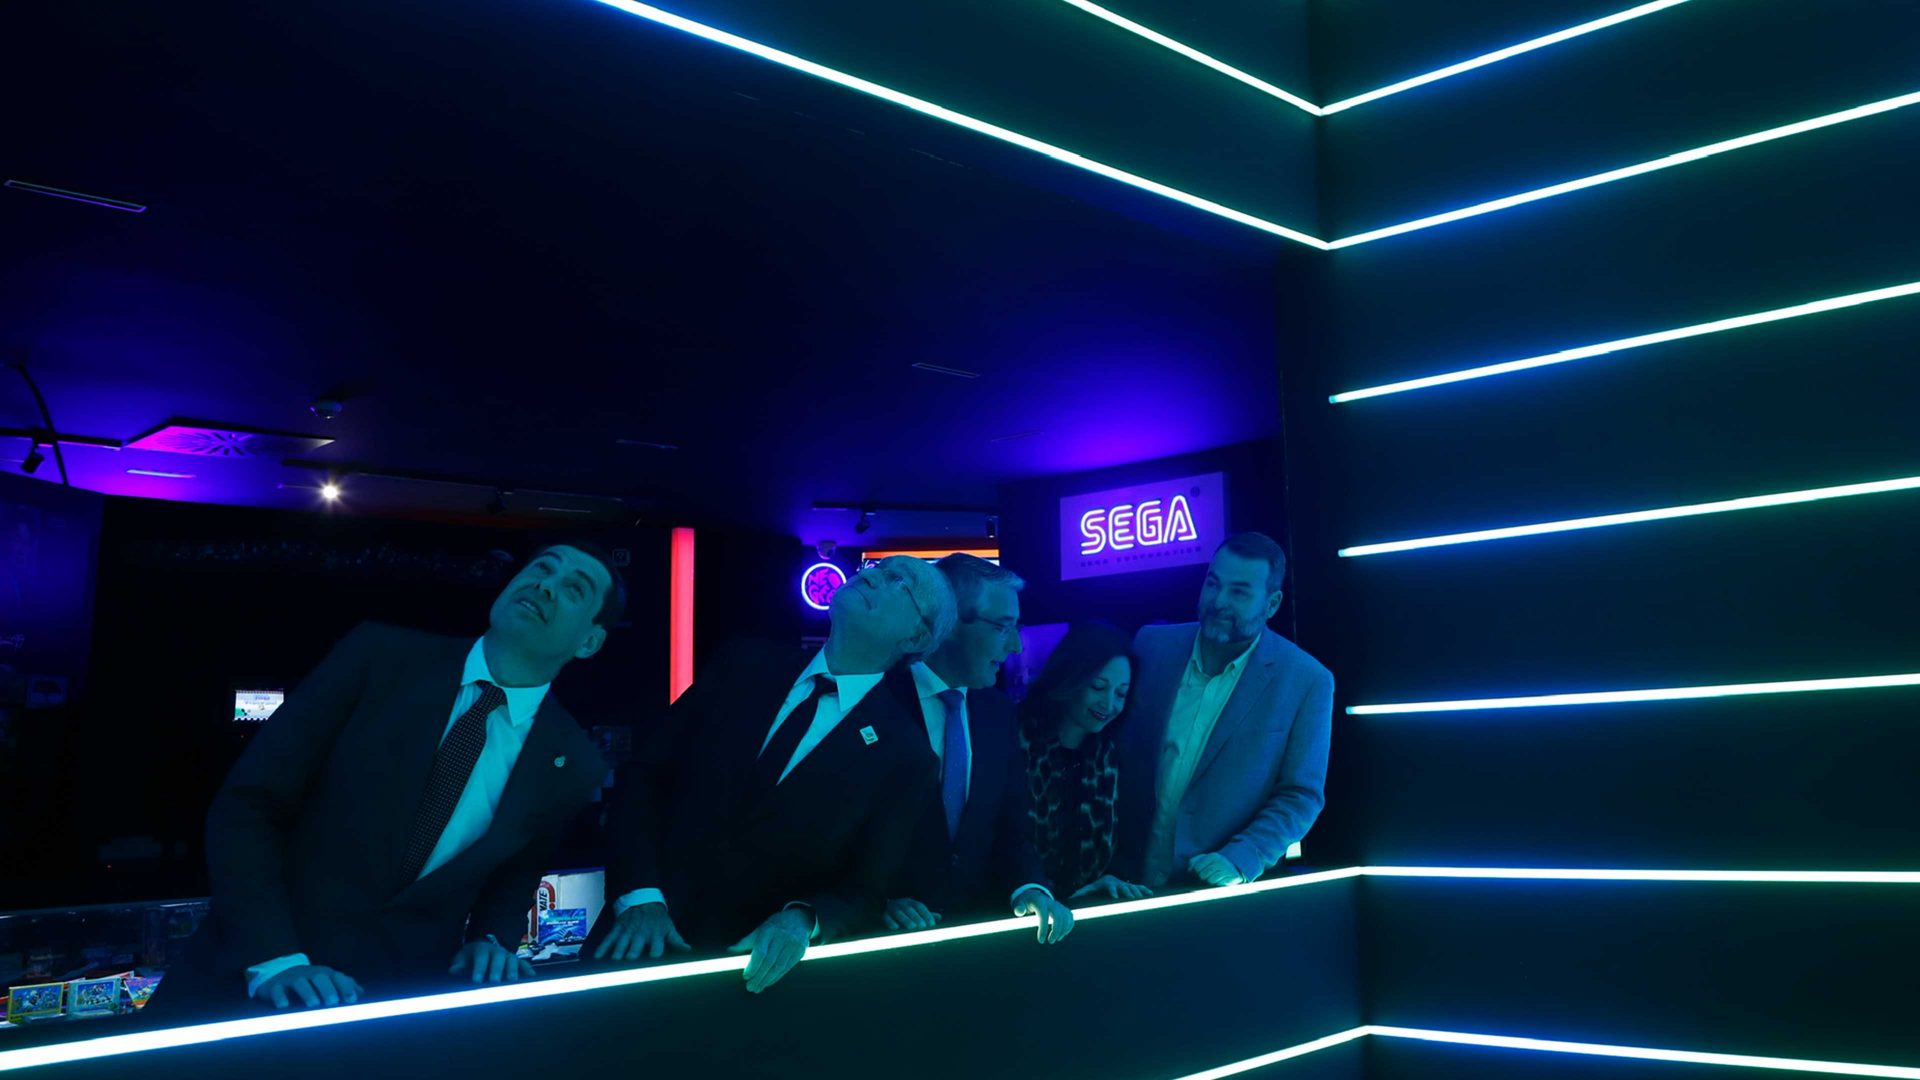 The President of the Junta de Andalucia, Juanma Moreno with the Mayor of Malaga, Francisco de la Torre at the opening of OXO Video Game Museum of Malaga. Photo: Alex Zea/Europa Press via Getty Images